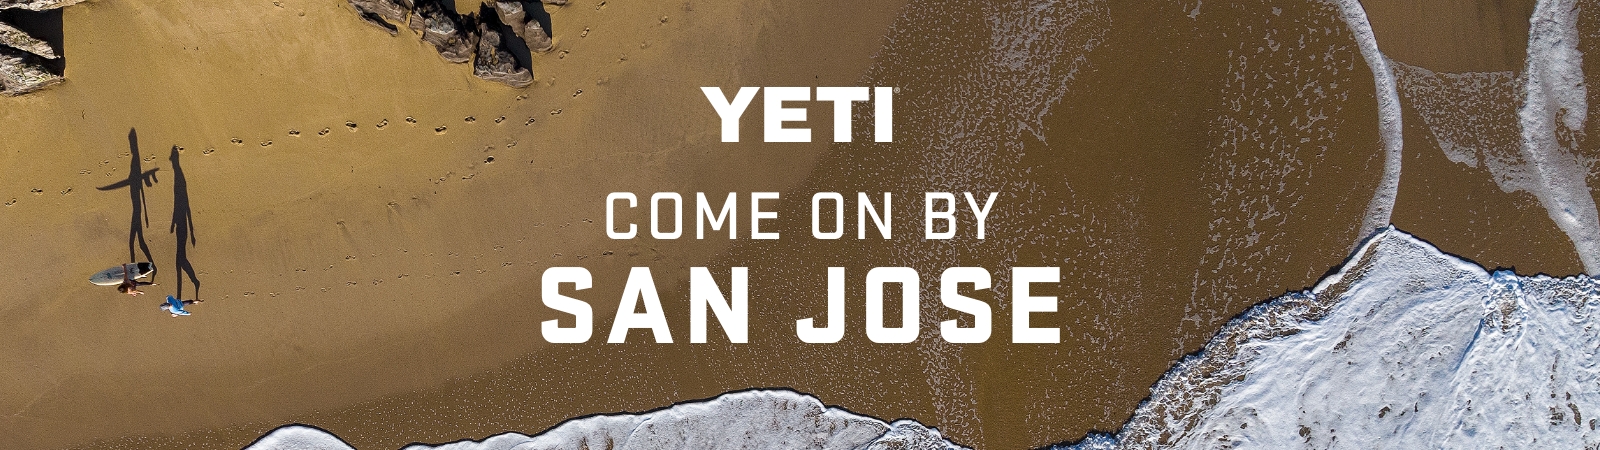 YETI Store Opens at Santana Row - The Silicon Valley Voice